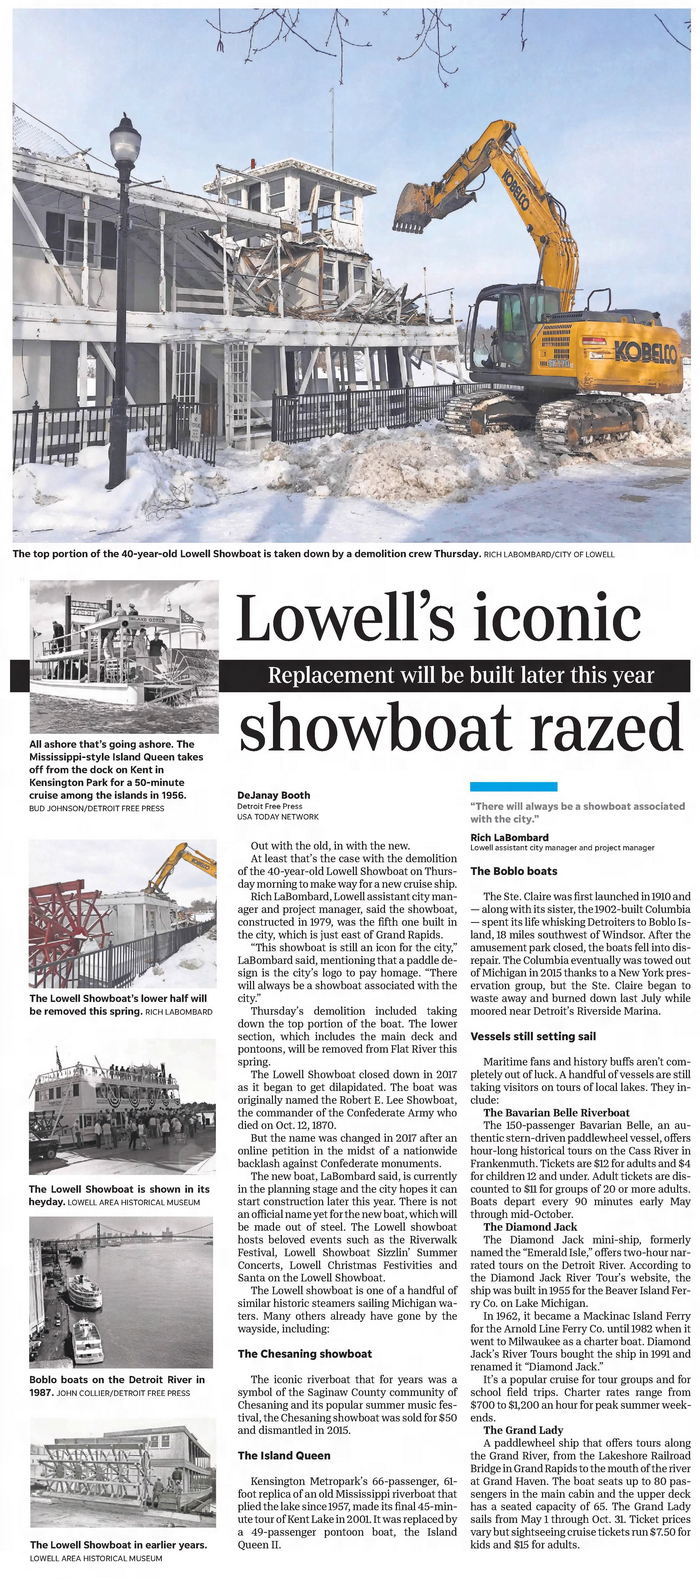 Chesaning Showboat - MARCH 2019 ARTICLE MENTIONING CHESANING